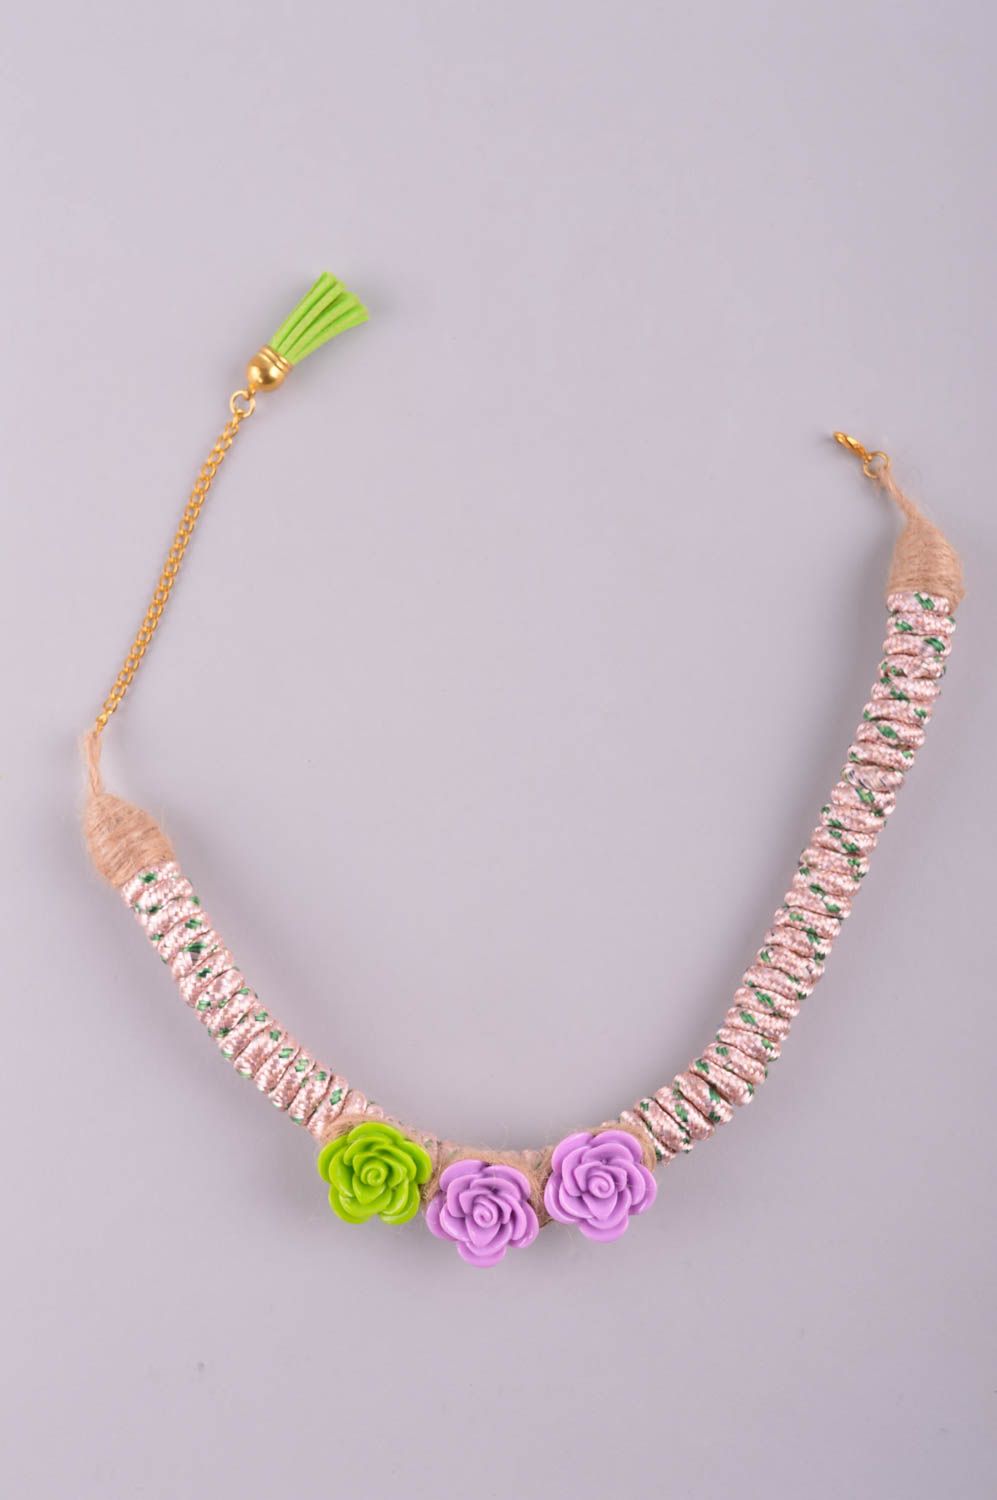 Beautiful handmade textile necklace fashion accessories cool neck accessories photo 5